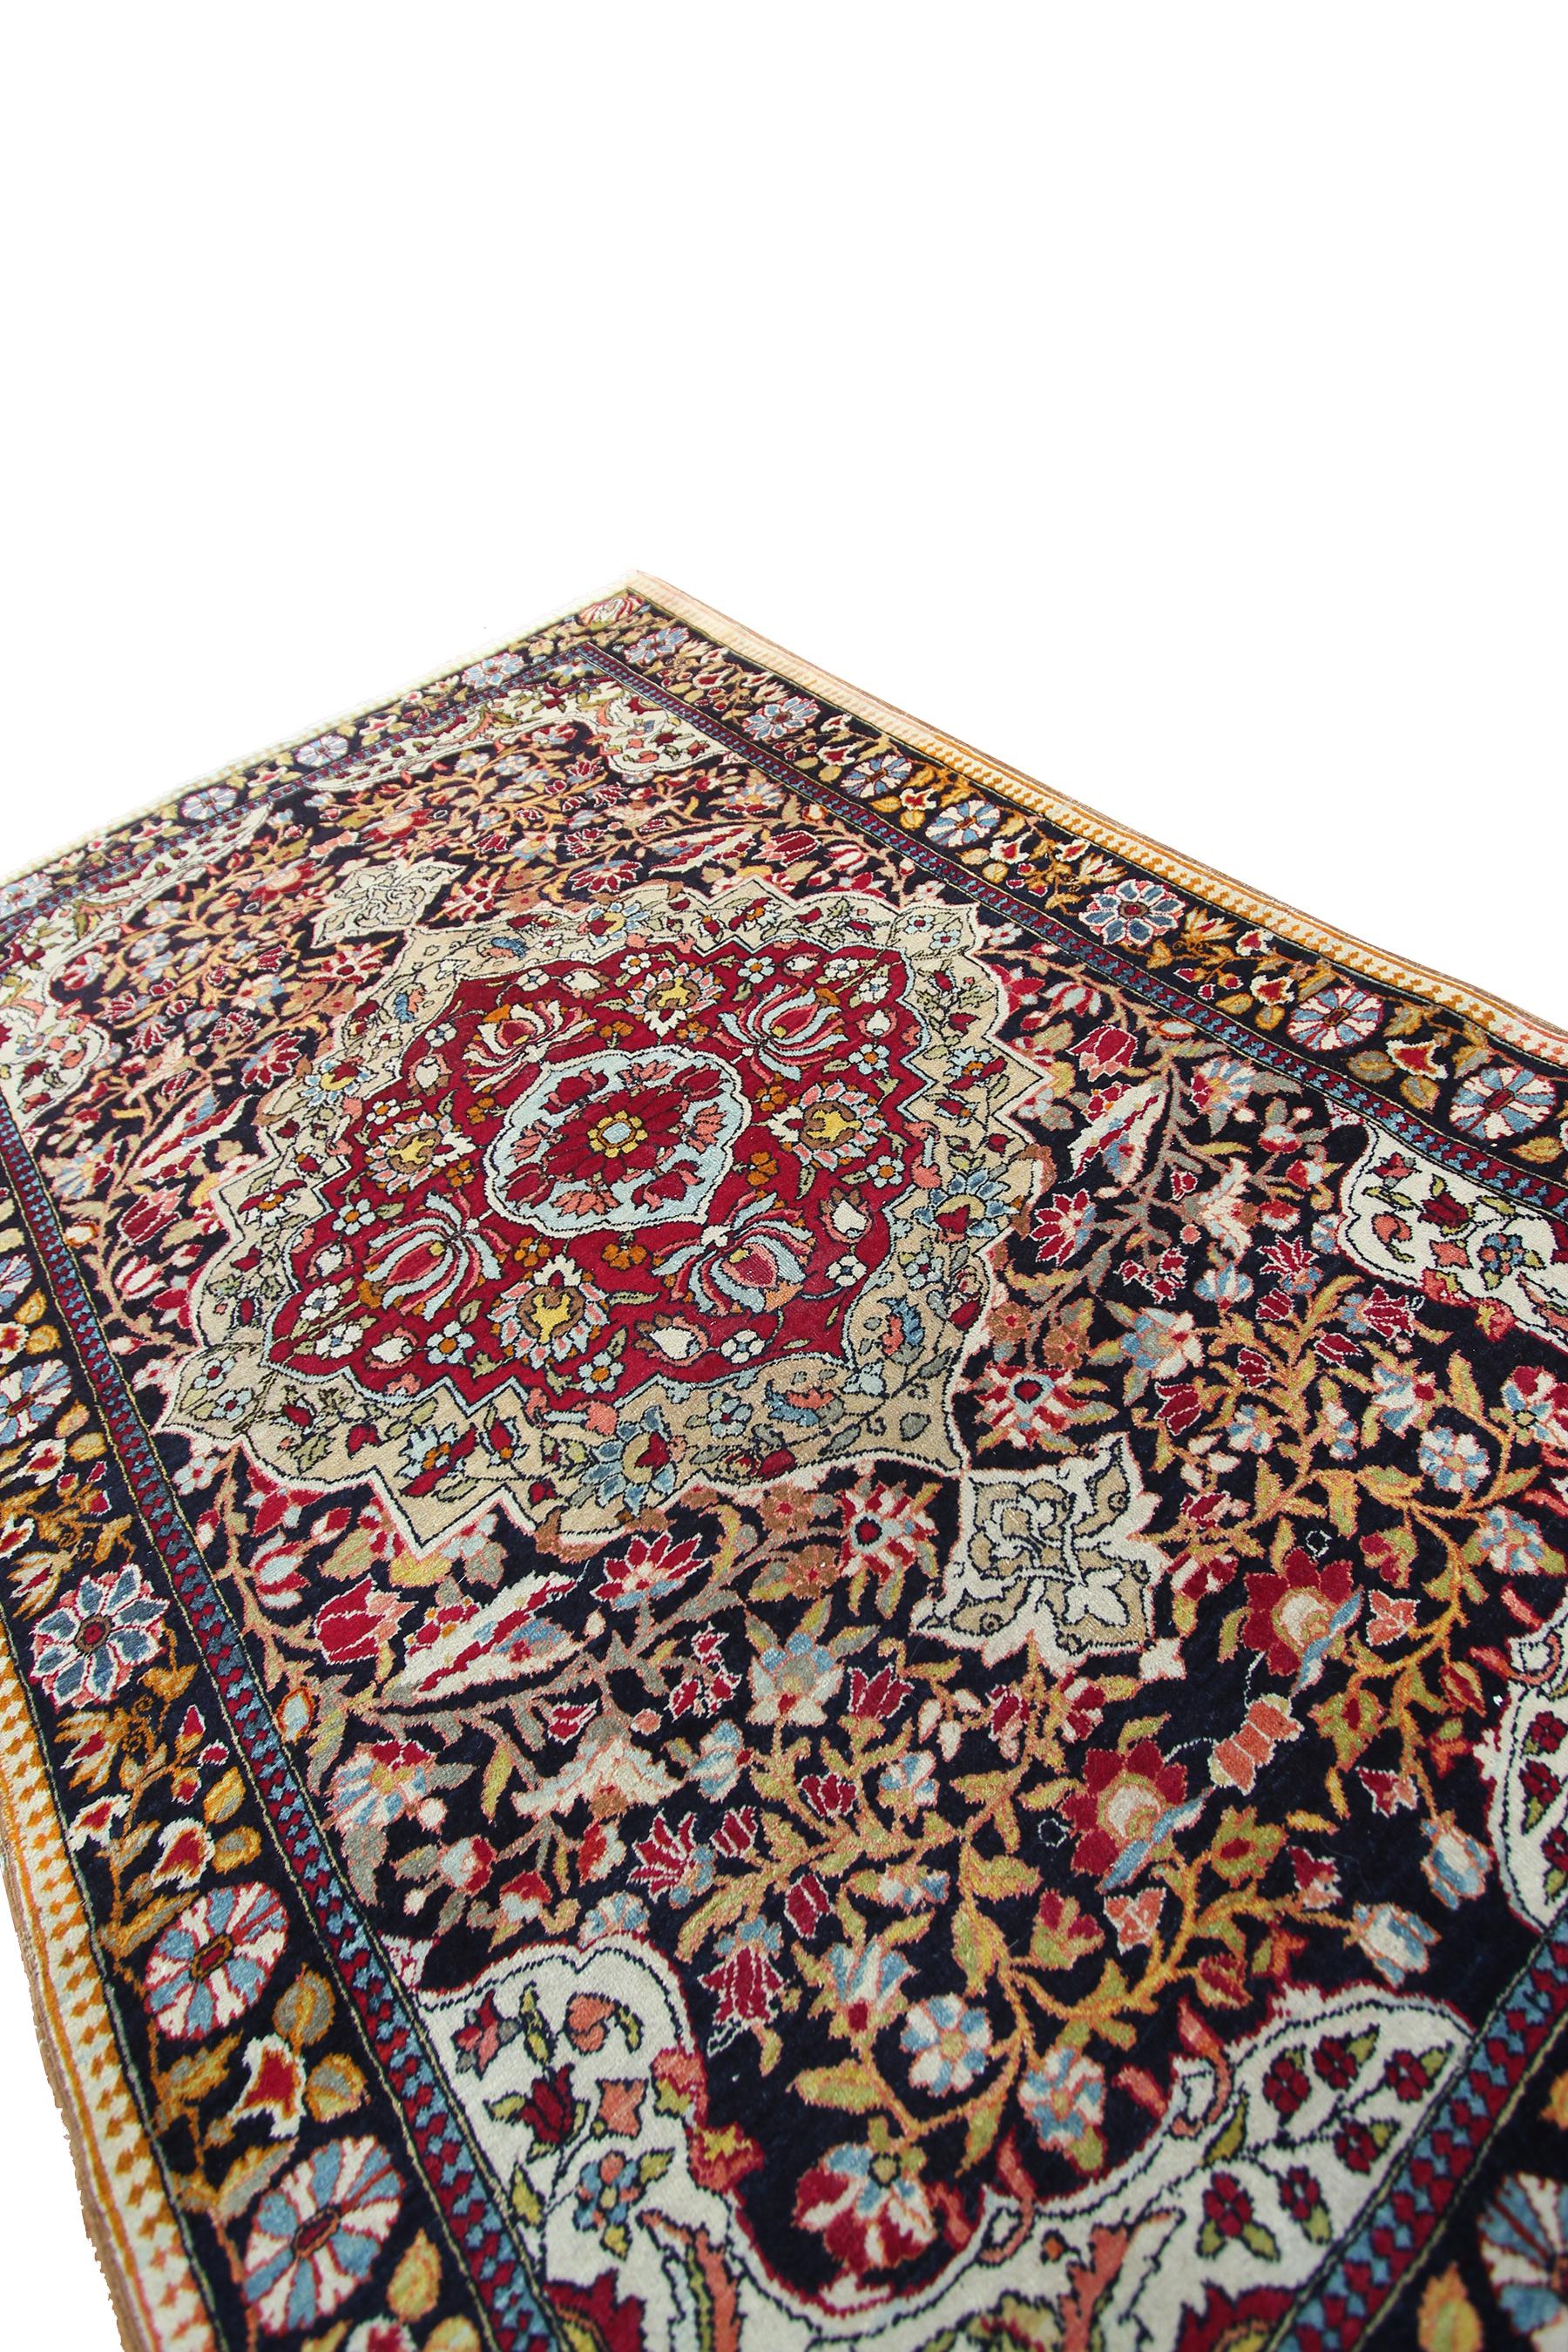 Hand-Knotted Black High Quality Antique Persian Isfahan Rug Artisan Work 4x5 107x153cm For Sale